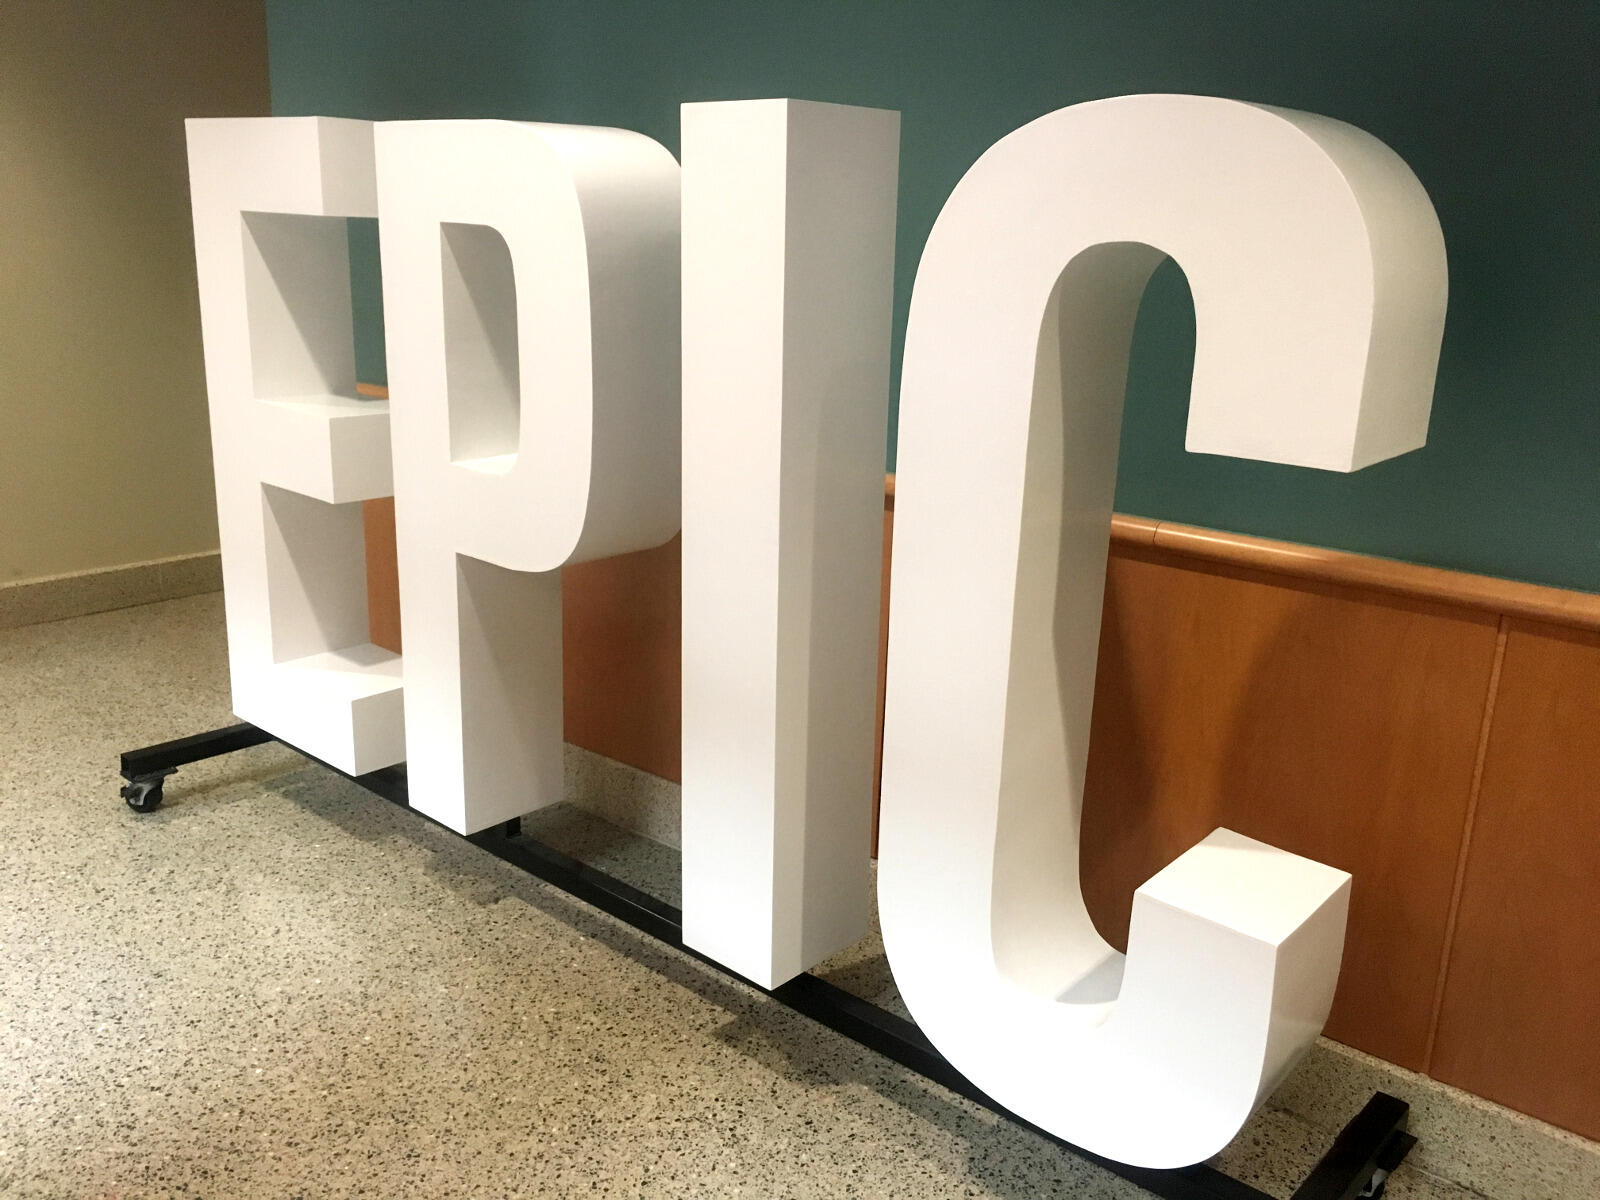 Funding from the VCU School of Business' EPIC challenge made the program possible this year.